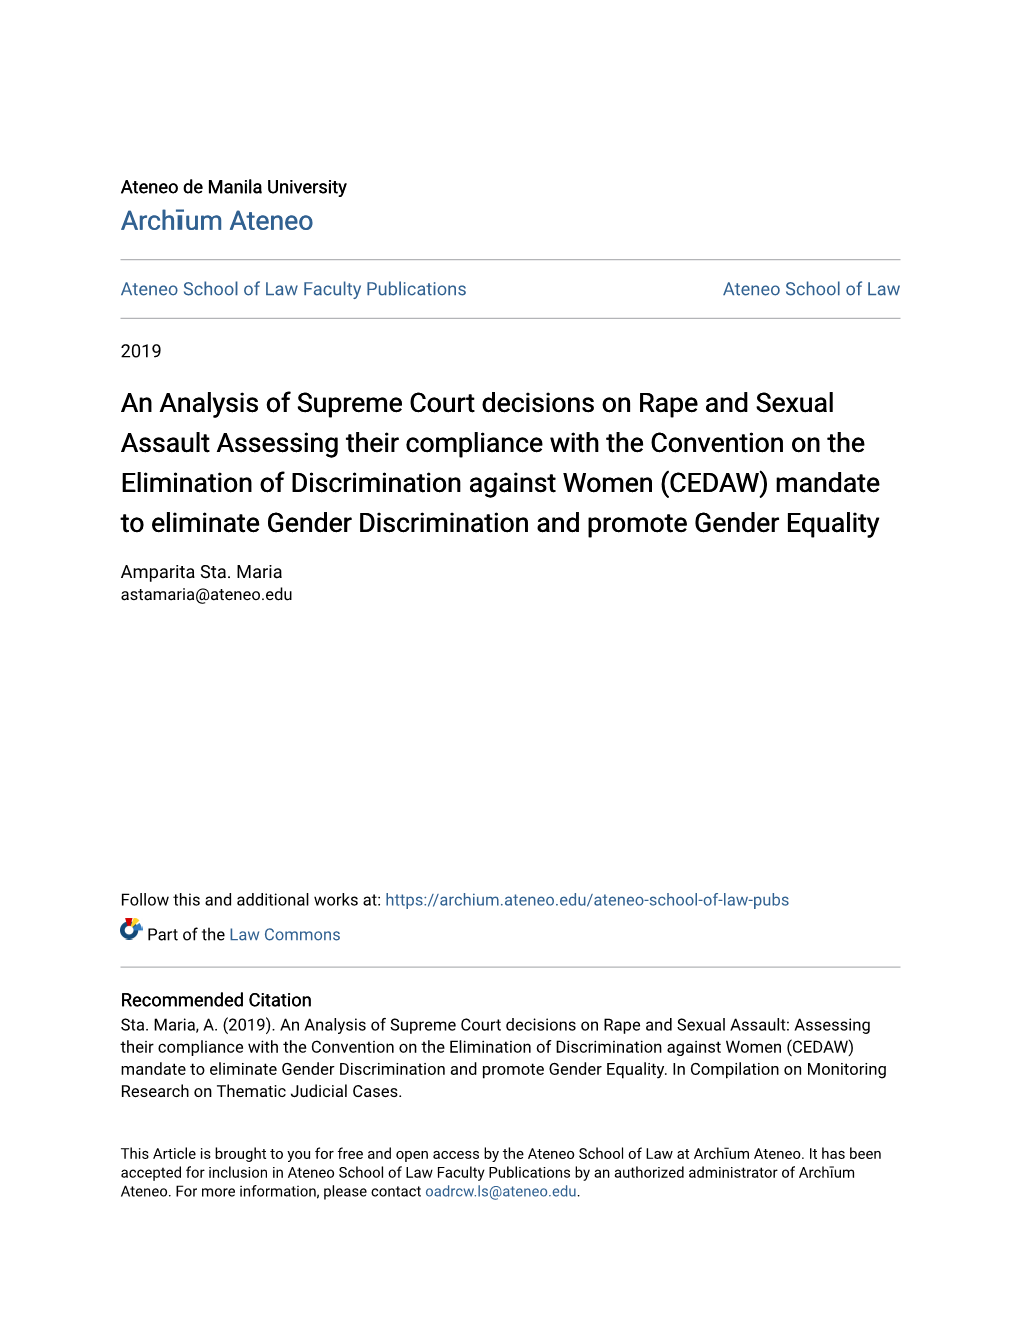 An Analysis of Supreme Court Decisions on Rape and Sexual